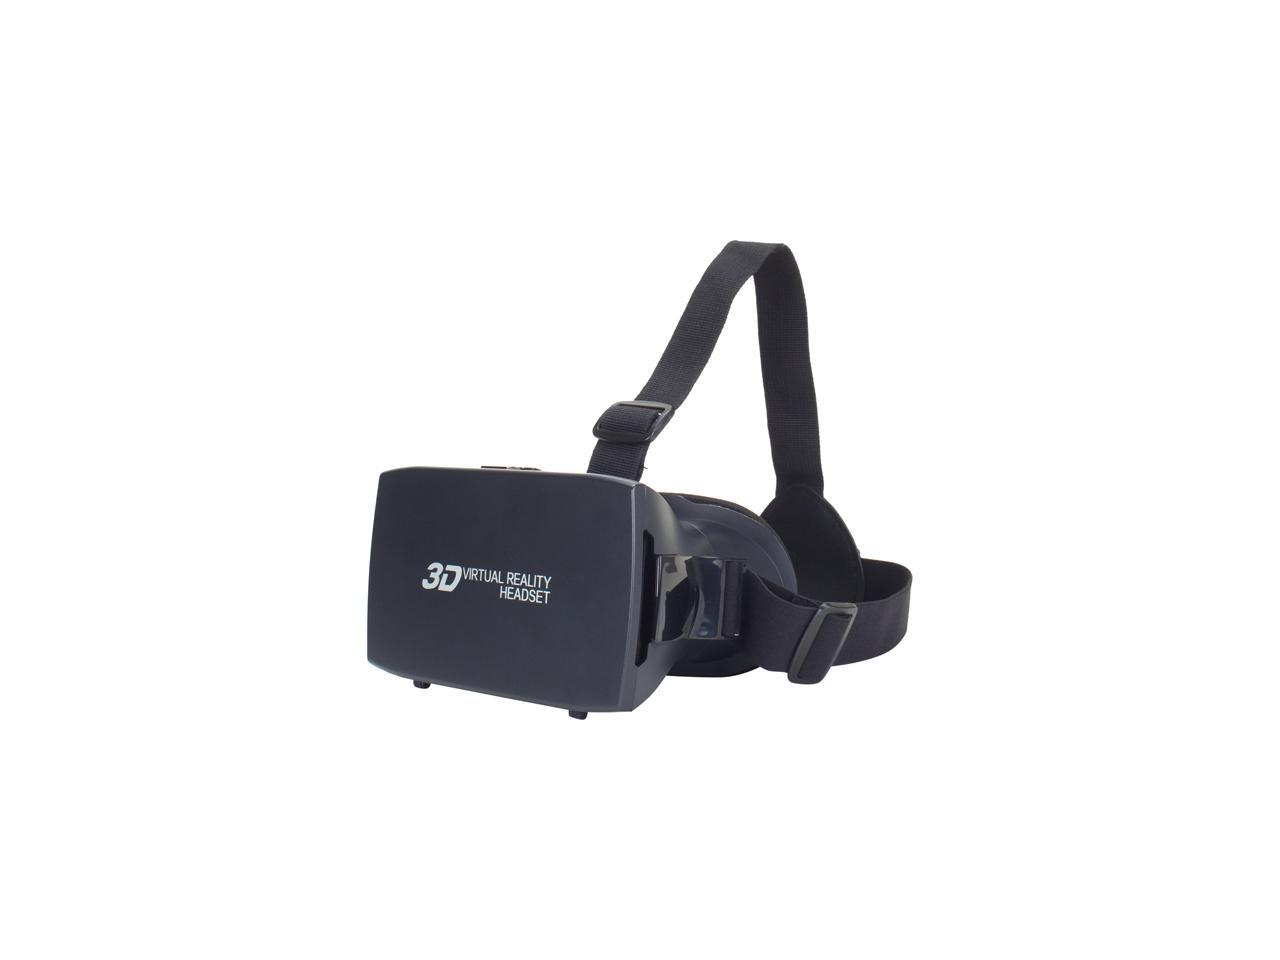 ENHANCE 3D VR Headset with Comfortable Nose-Padding, Adjustable Head Strap, Adjustable Object and Pupillary Distance